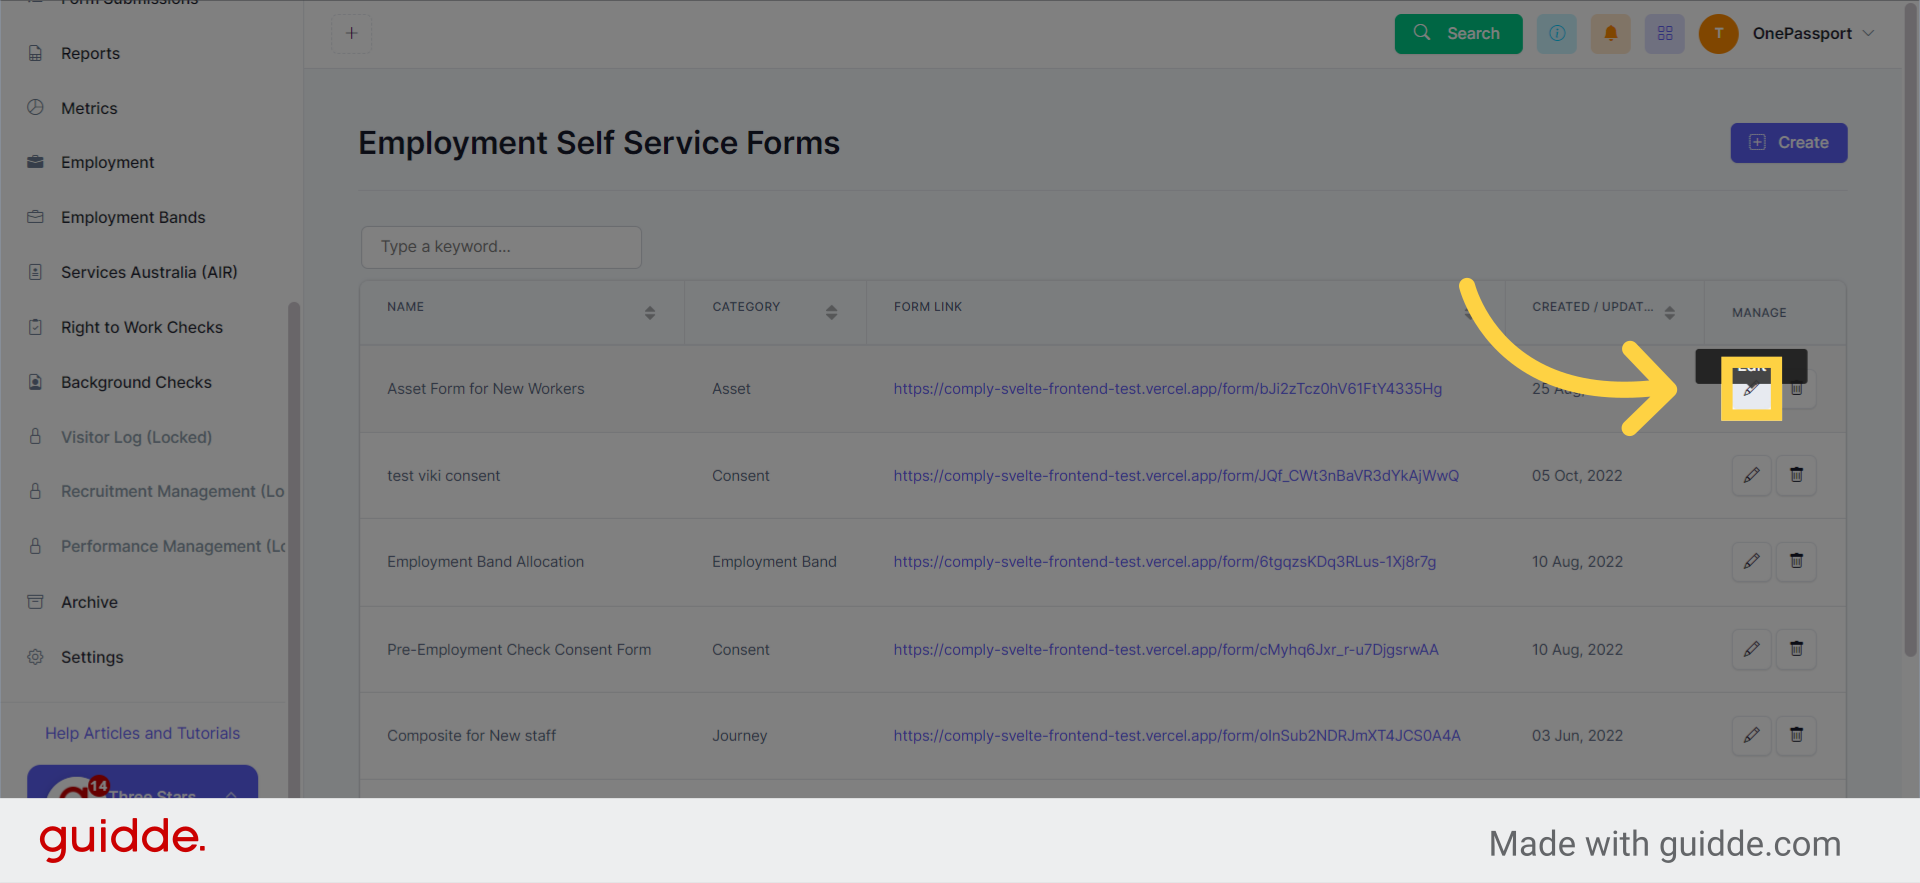 The newly created Asset Form will pop up in the list. You can now copy the form link to be shared with your new employees.
You may also edit the form using the pen icon